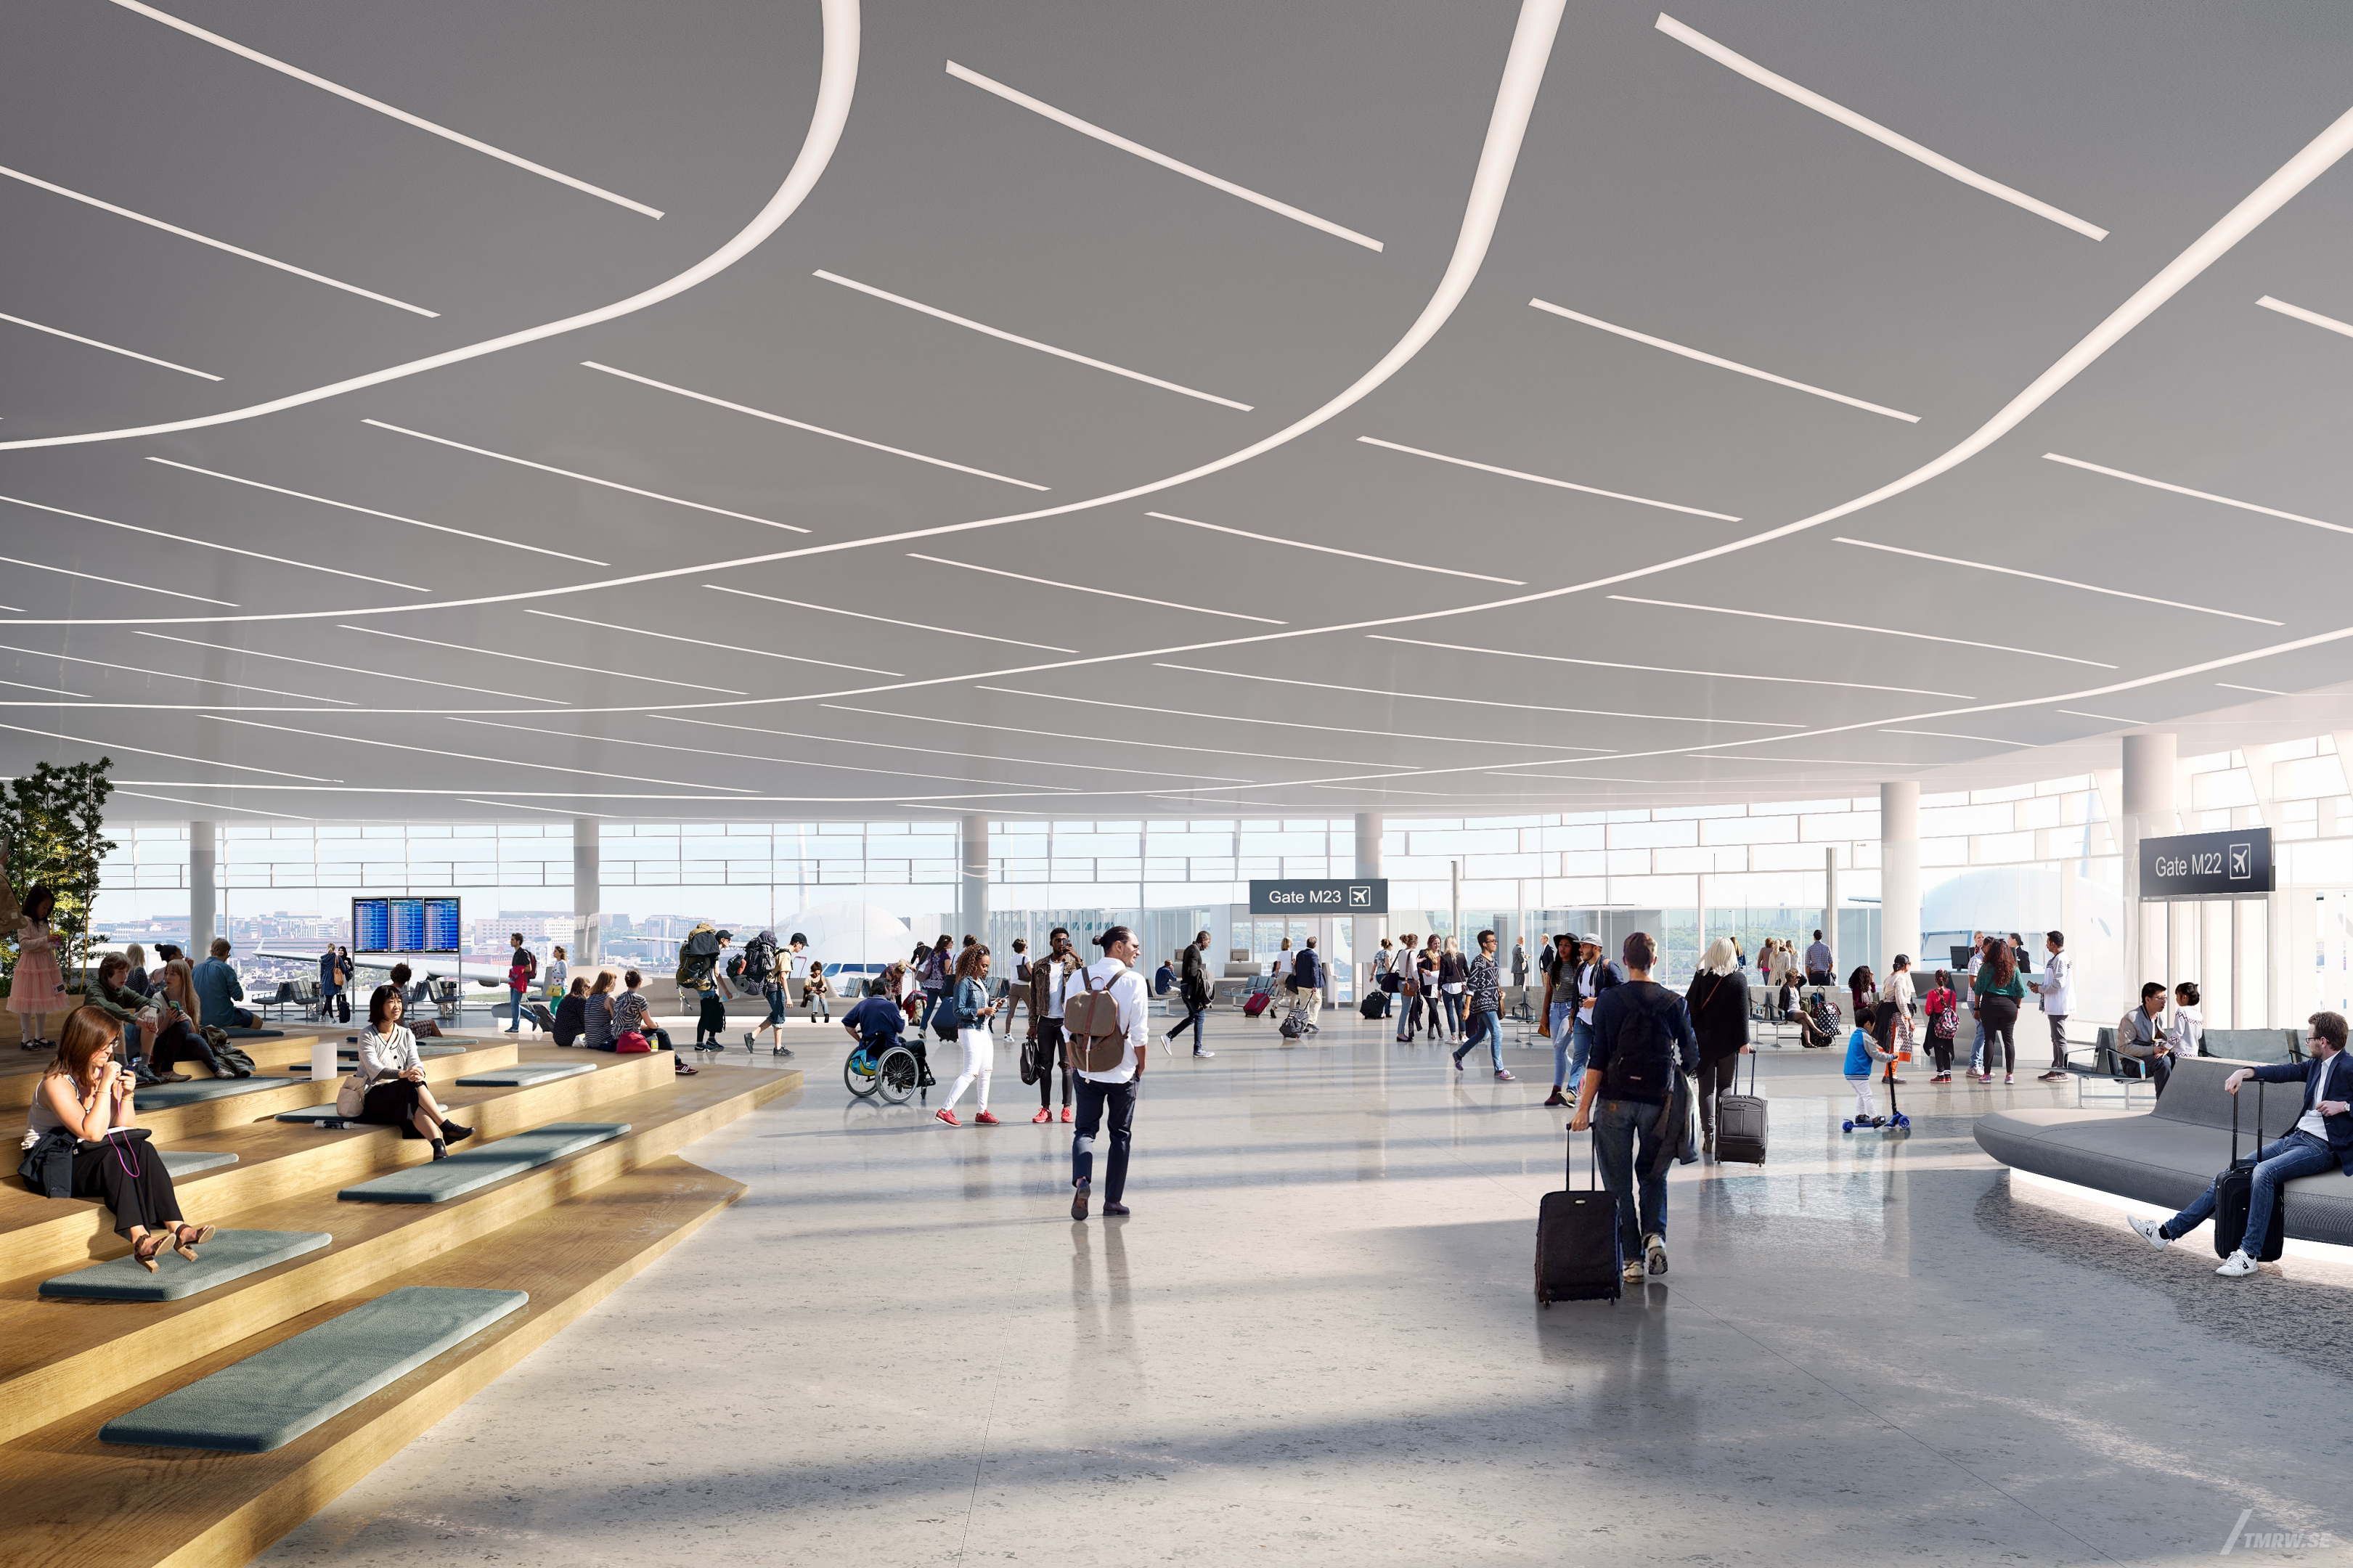 Architectural visualization of Chicago O'Hare for HOK. A image of the interior inside an airport with people walking around. This is in daylight.